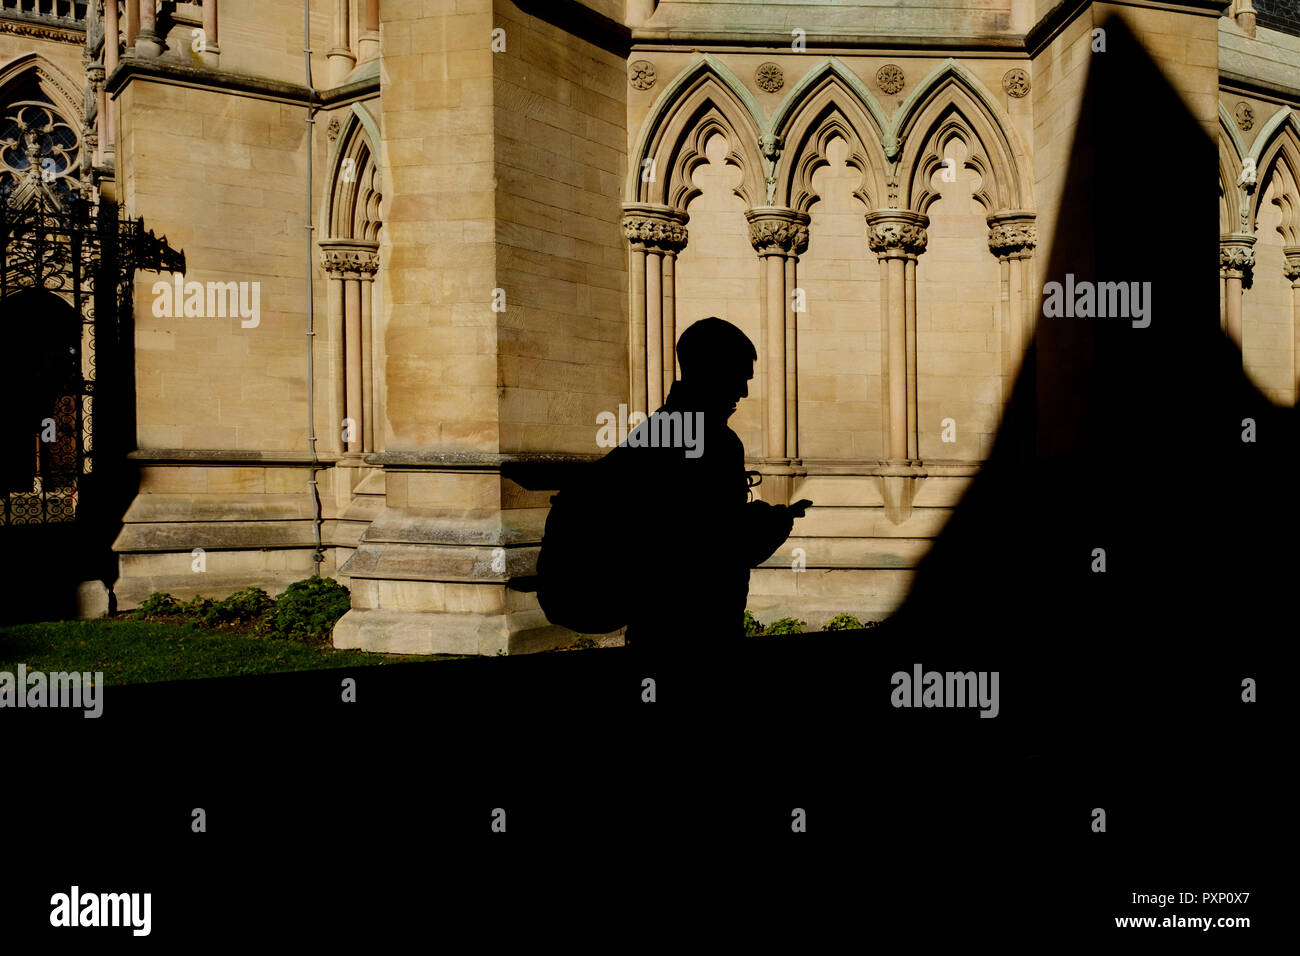 A silhouette of a person walking infront of St John's college Chapel, St John's Street, Cambridge, UK Stock Photo